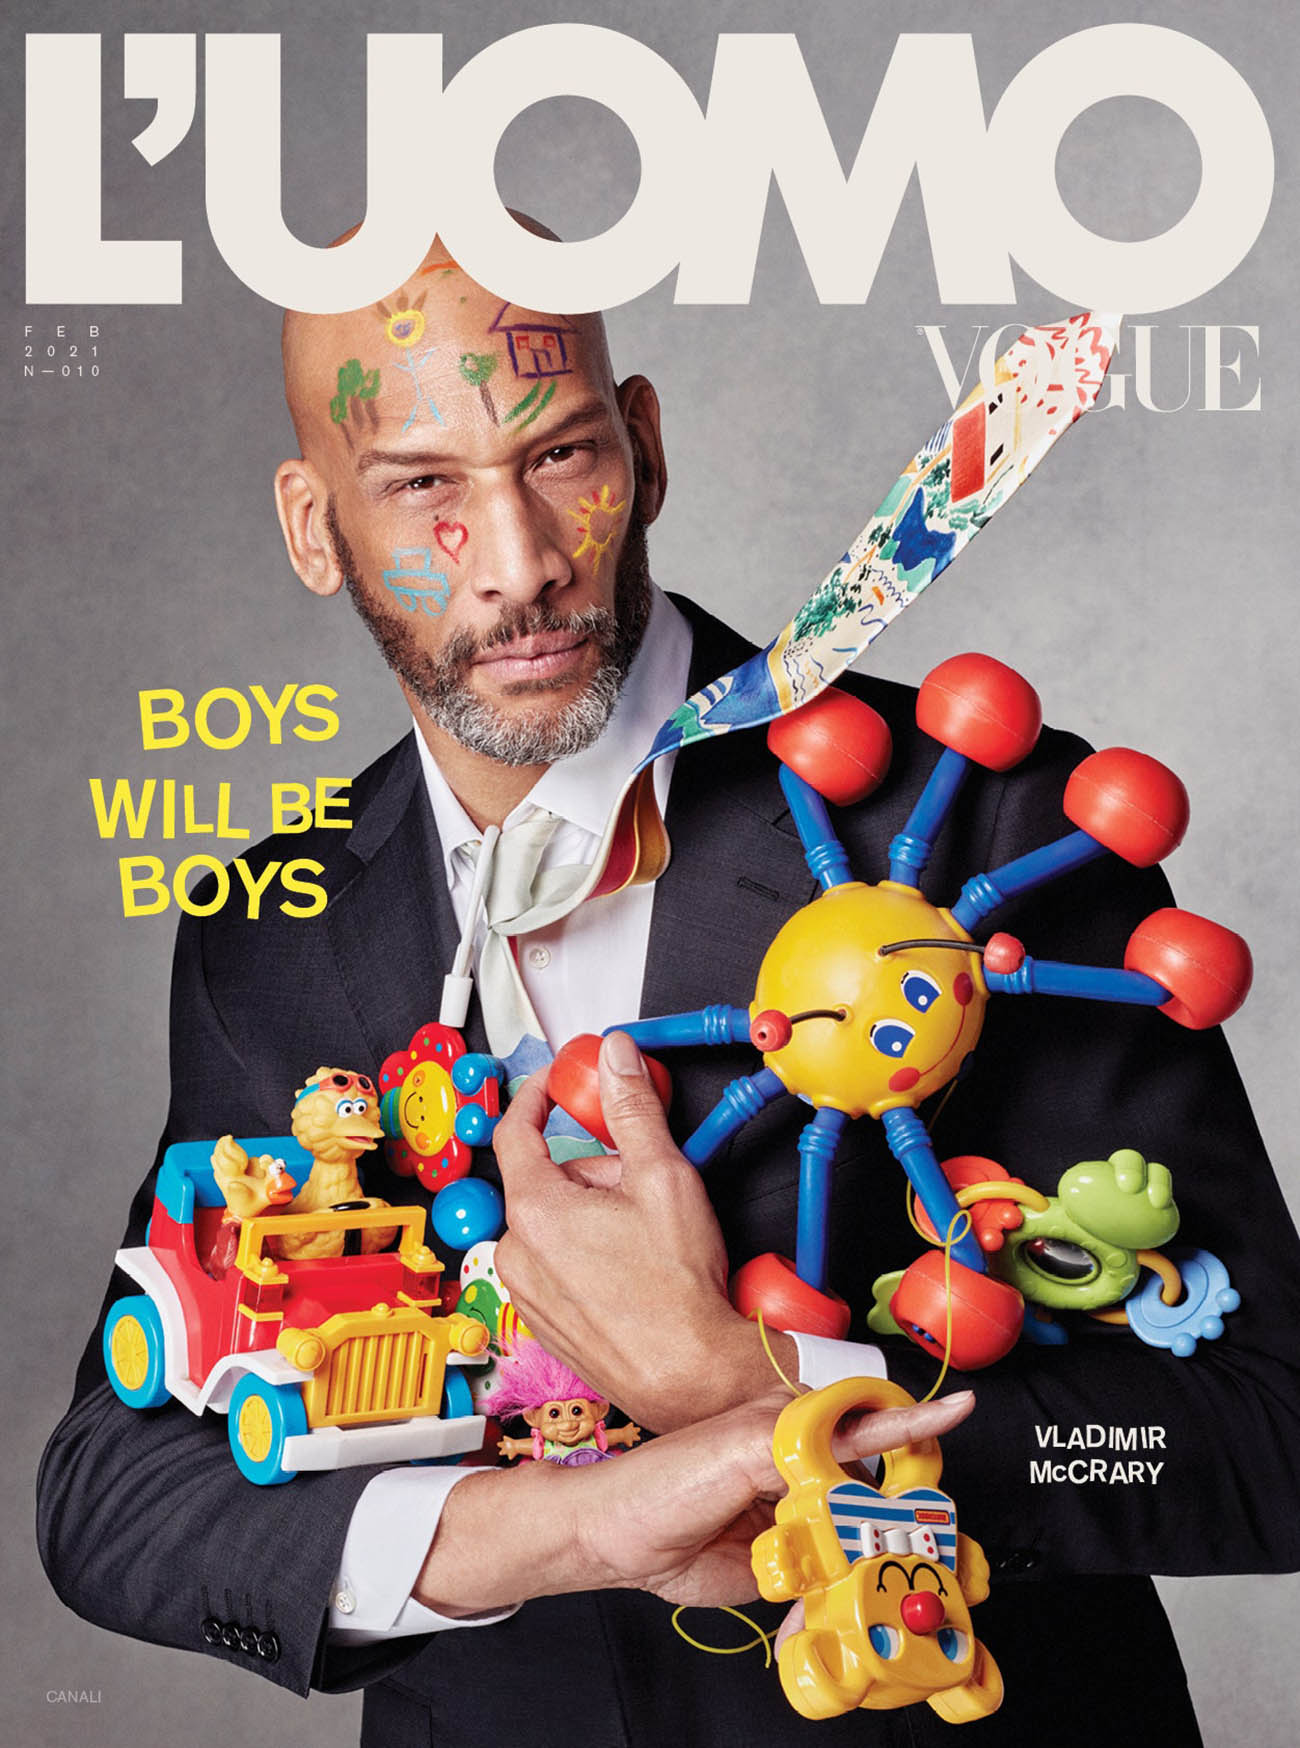 Vladimir McCrary covers L’Uomo Vogue Issue 10 by Julien Martinez Leclerc